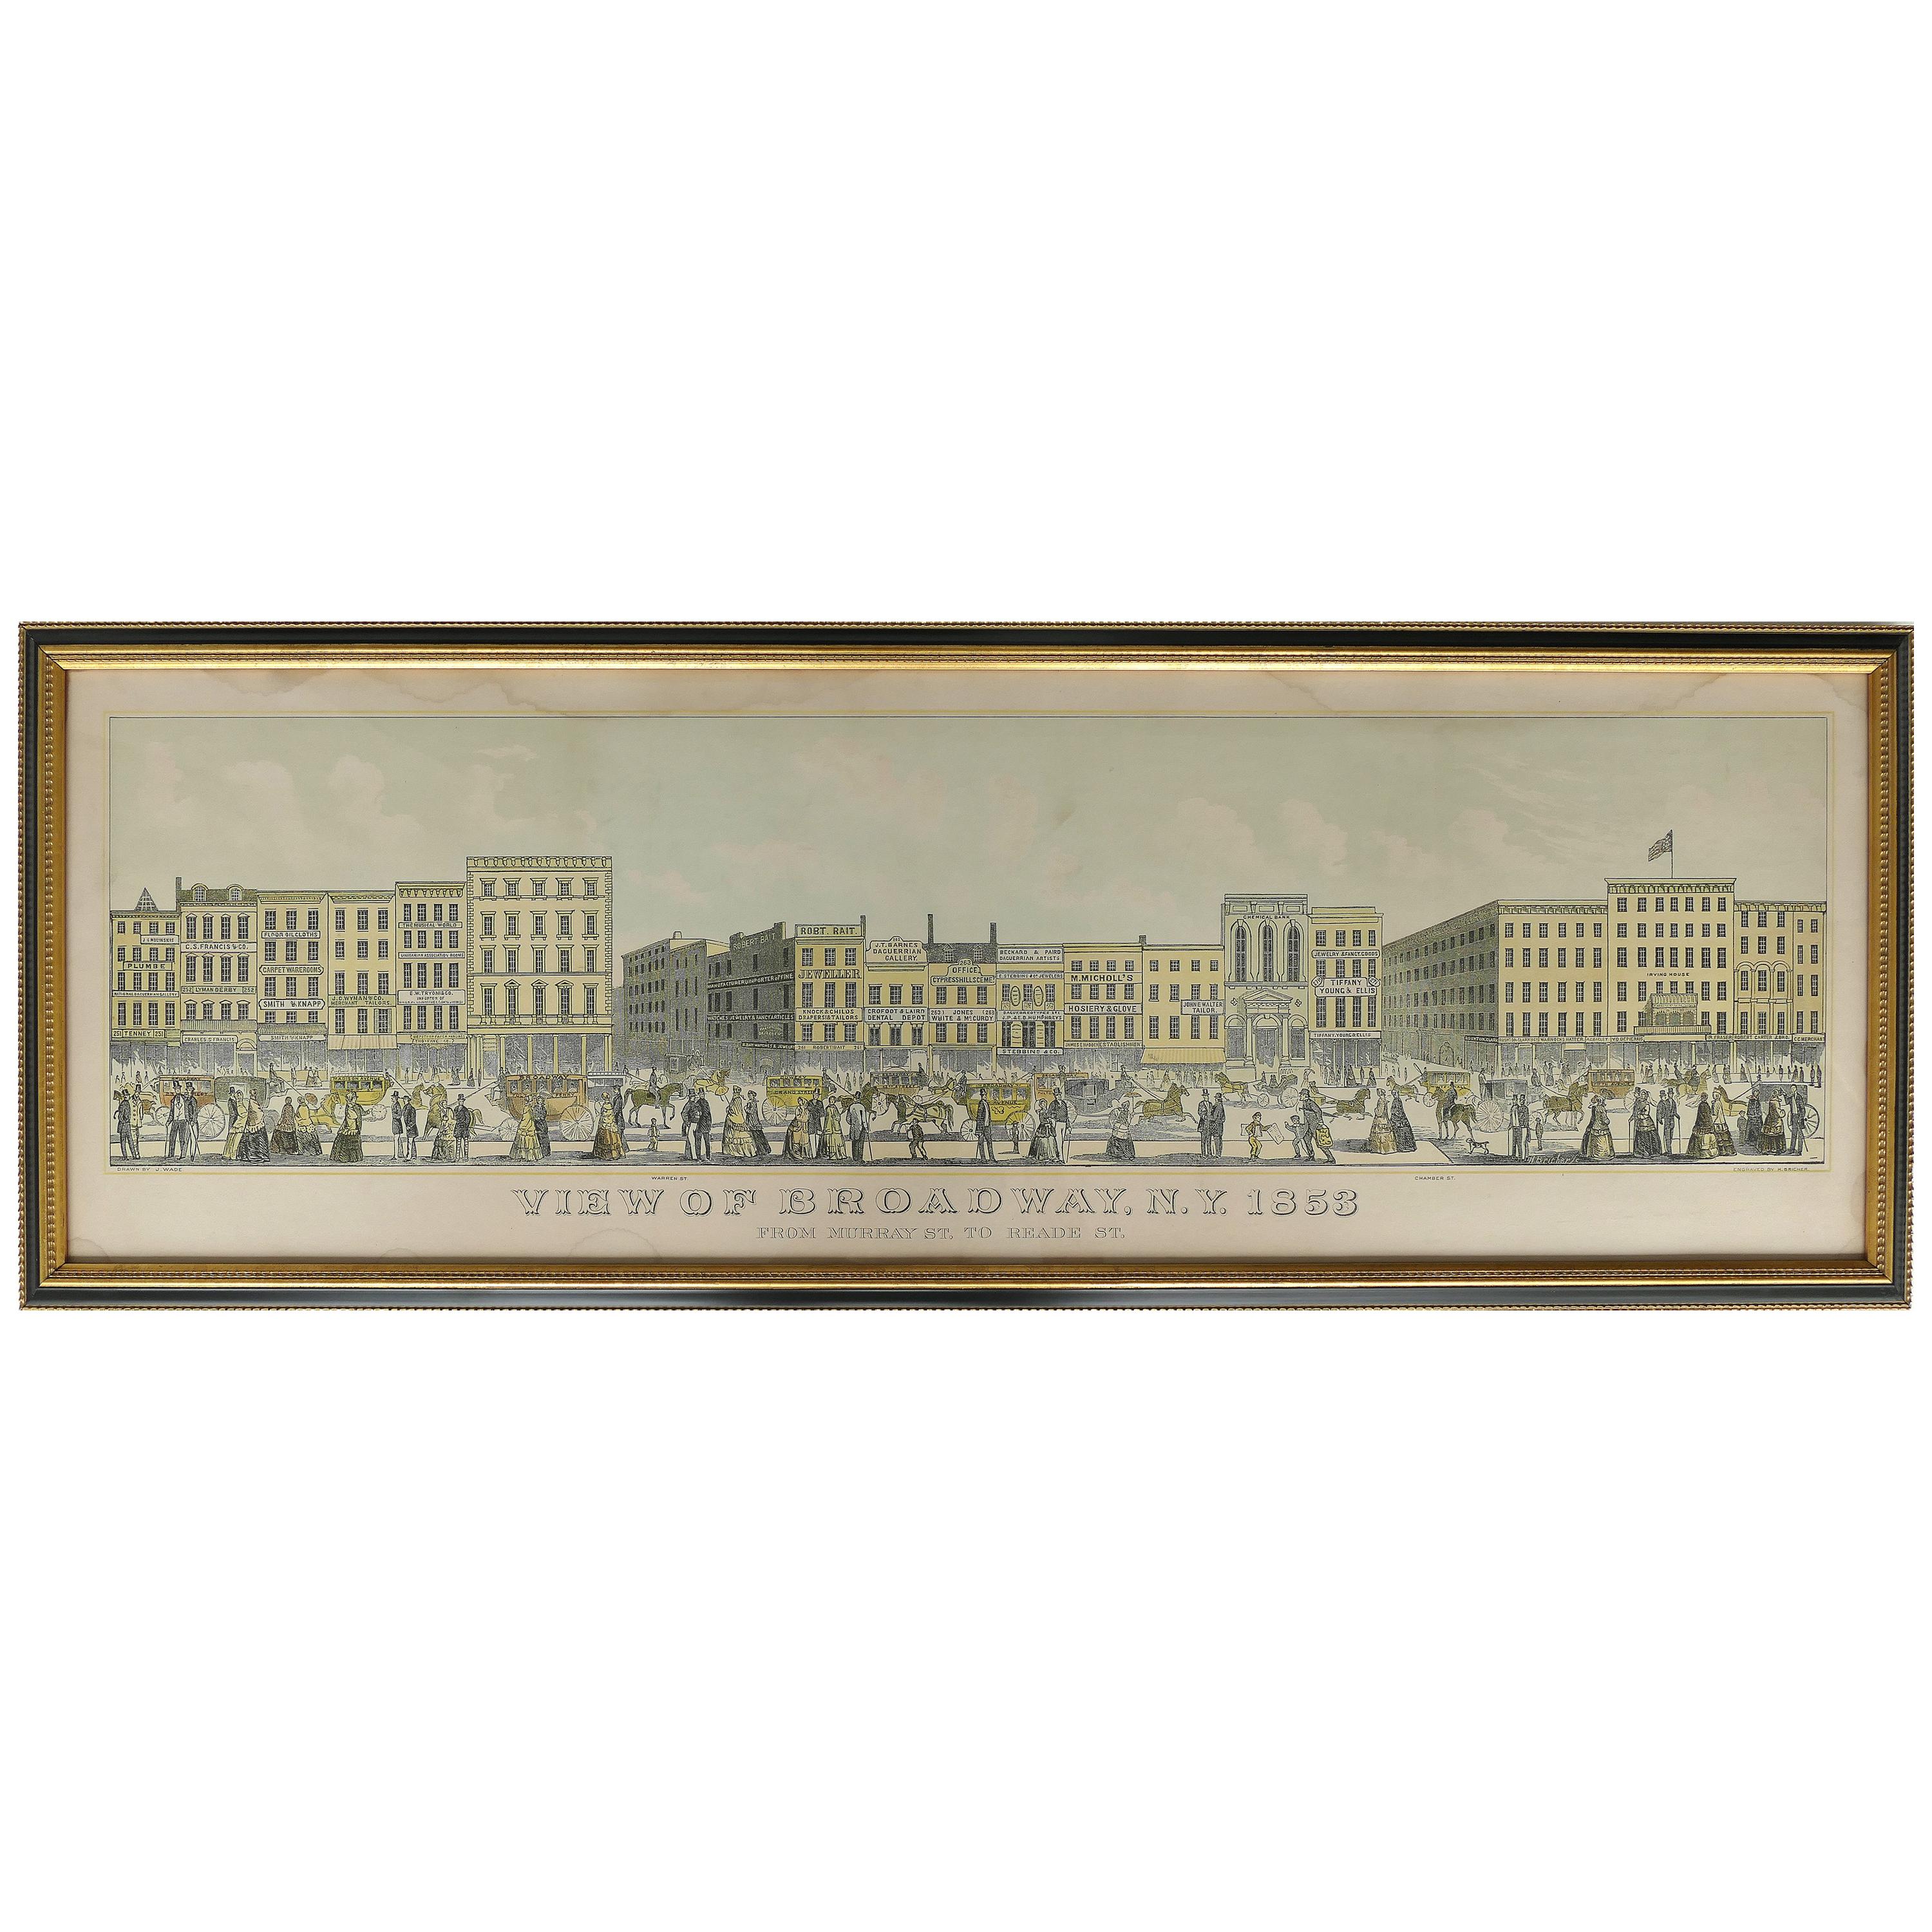 "View of Broadway, N.Y. 1853" Engraving by J. Wade and H. Bricher